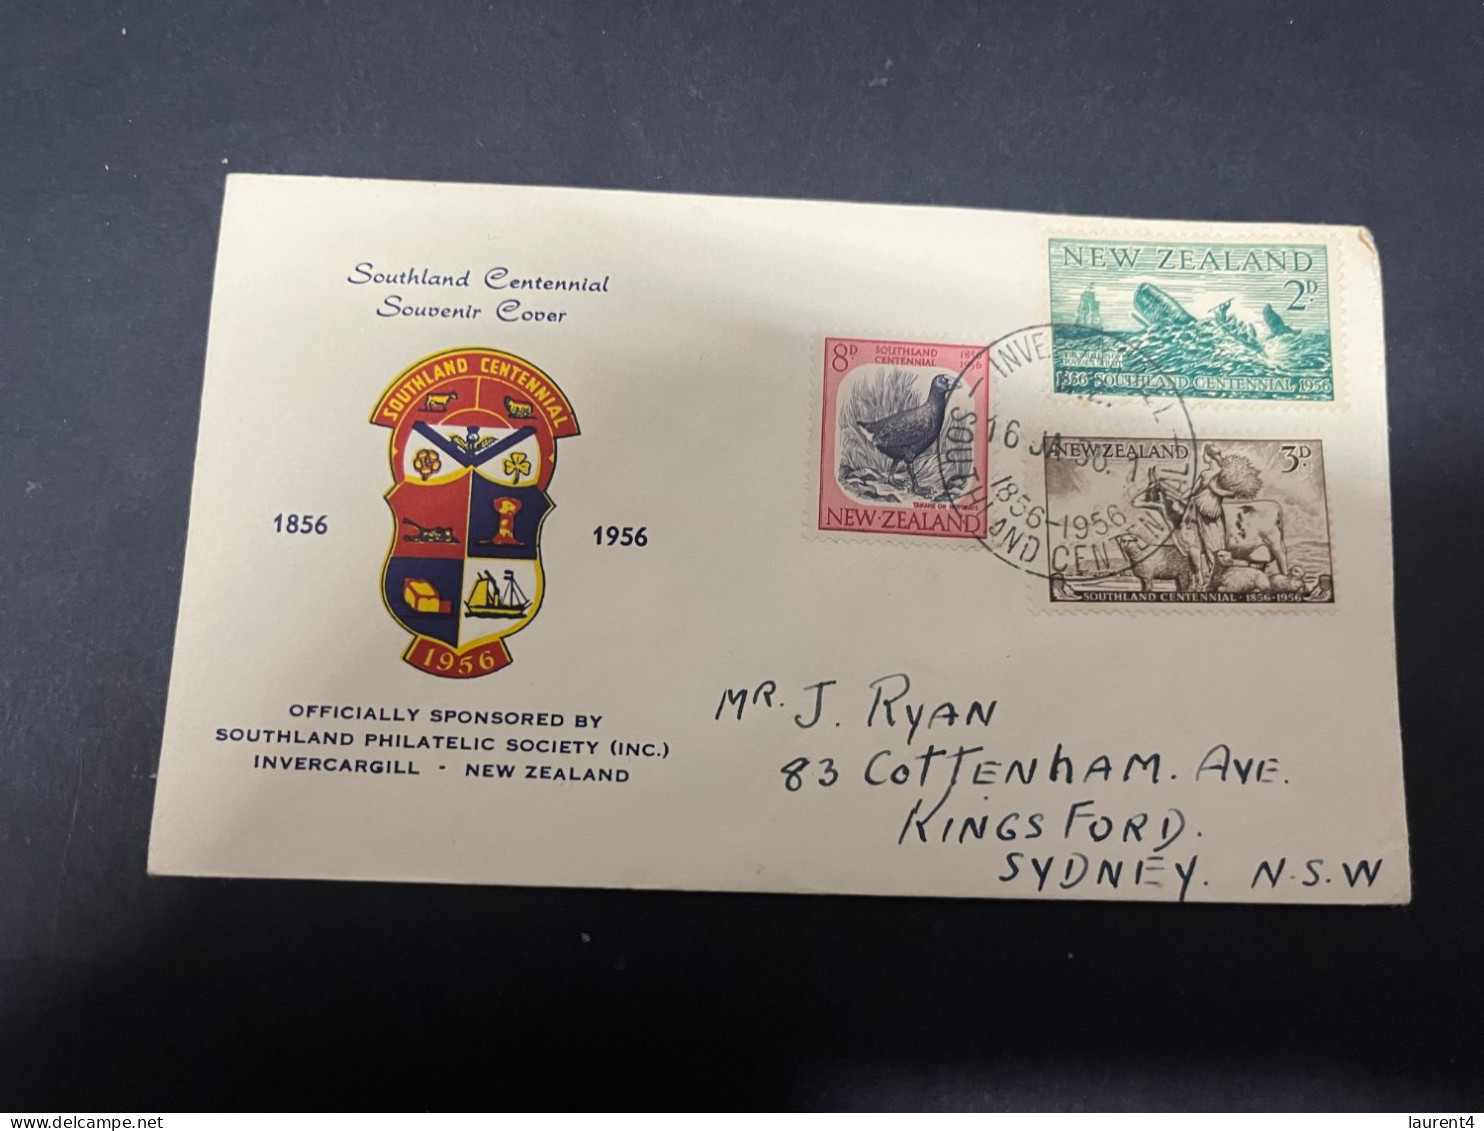 16-4-2024 (2 Z 14) FDC - New Zealand - Posted To Sydney In Australia - 1956 - Southland Centenial - FDC